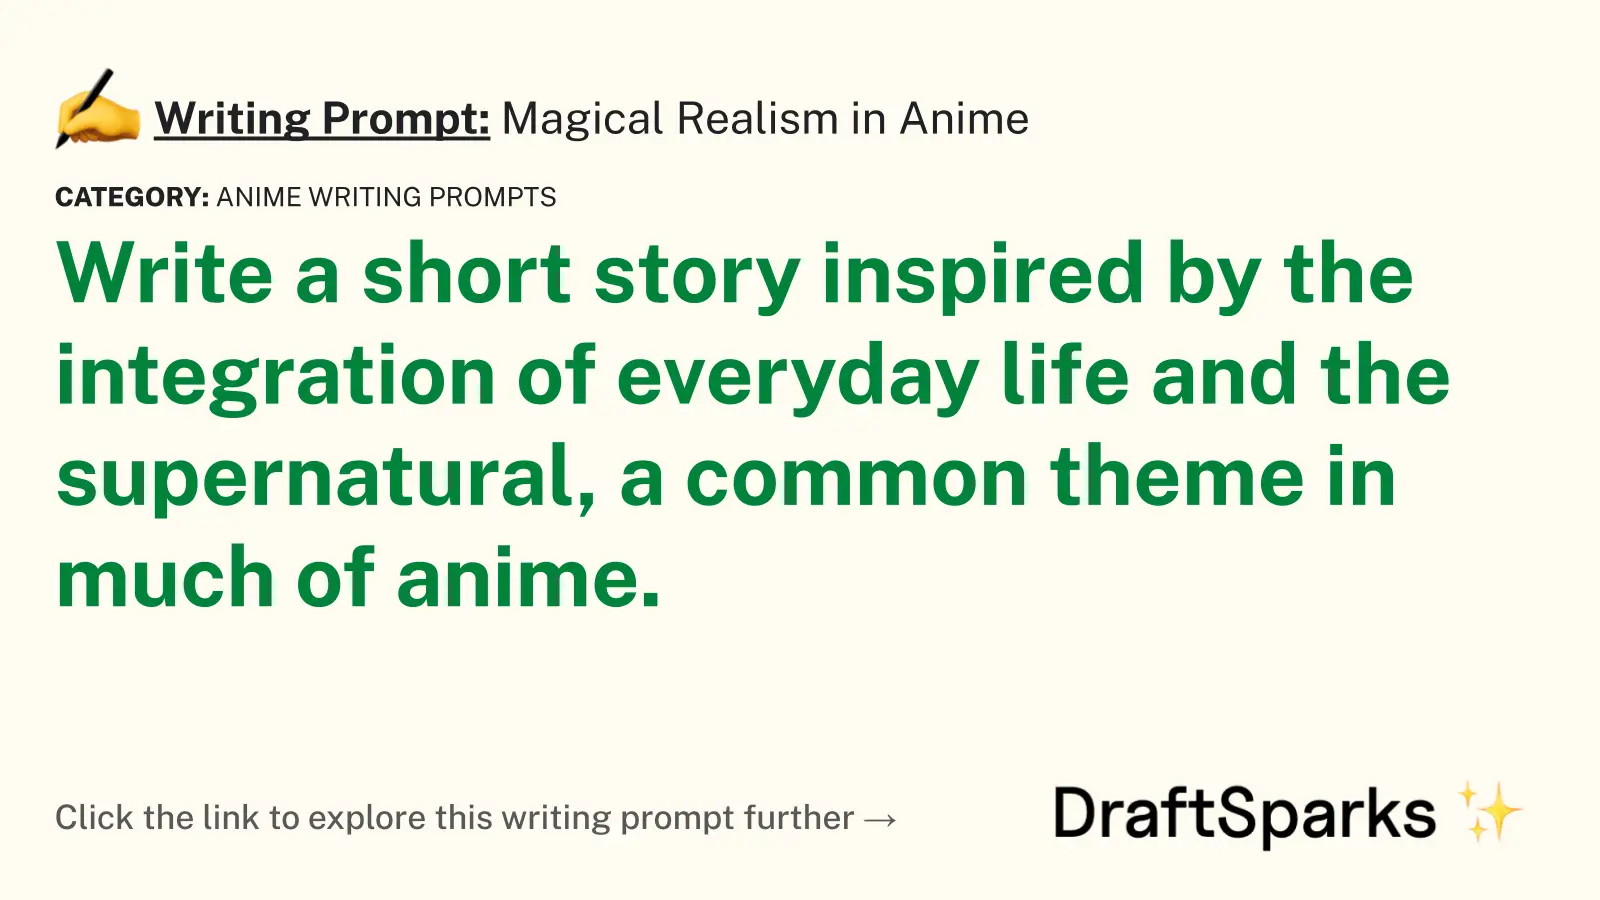 Magical Realism in Anime